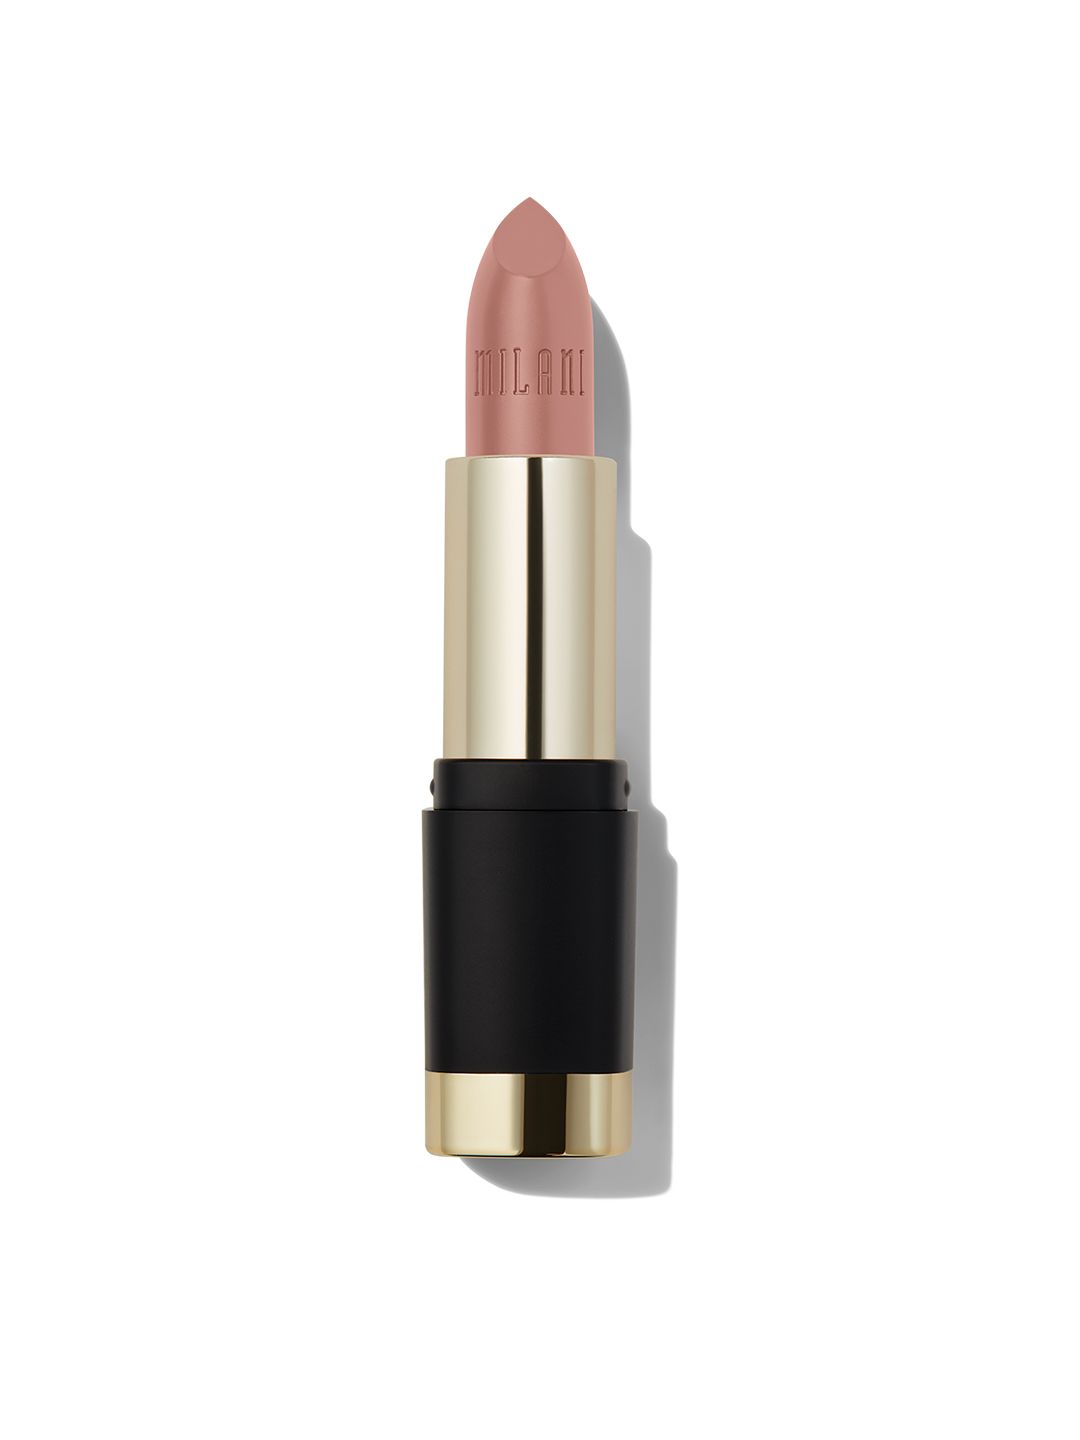 MILANI Bold Color Statement Matte Lipstick - I Am Awesome 03 Price in India